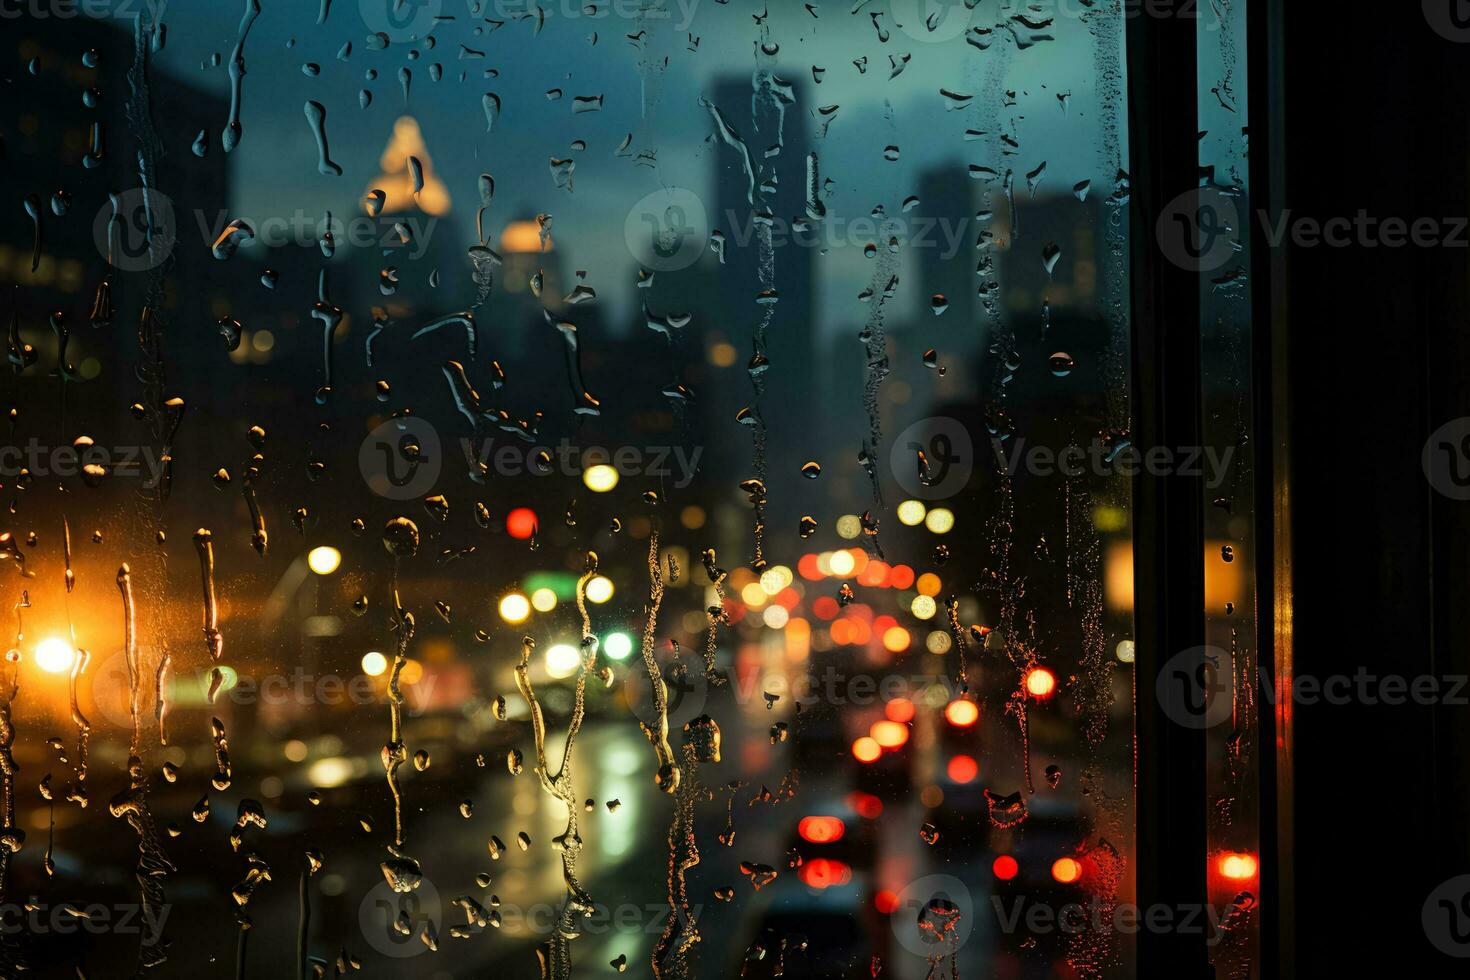 Twilight cityscape glimpsed through rain speckled window a close up study in tranquility photo